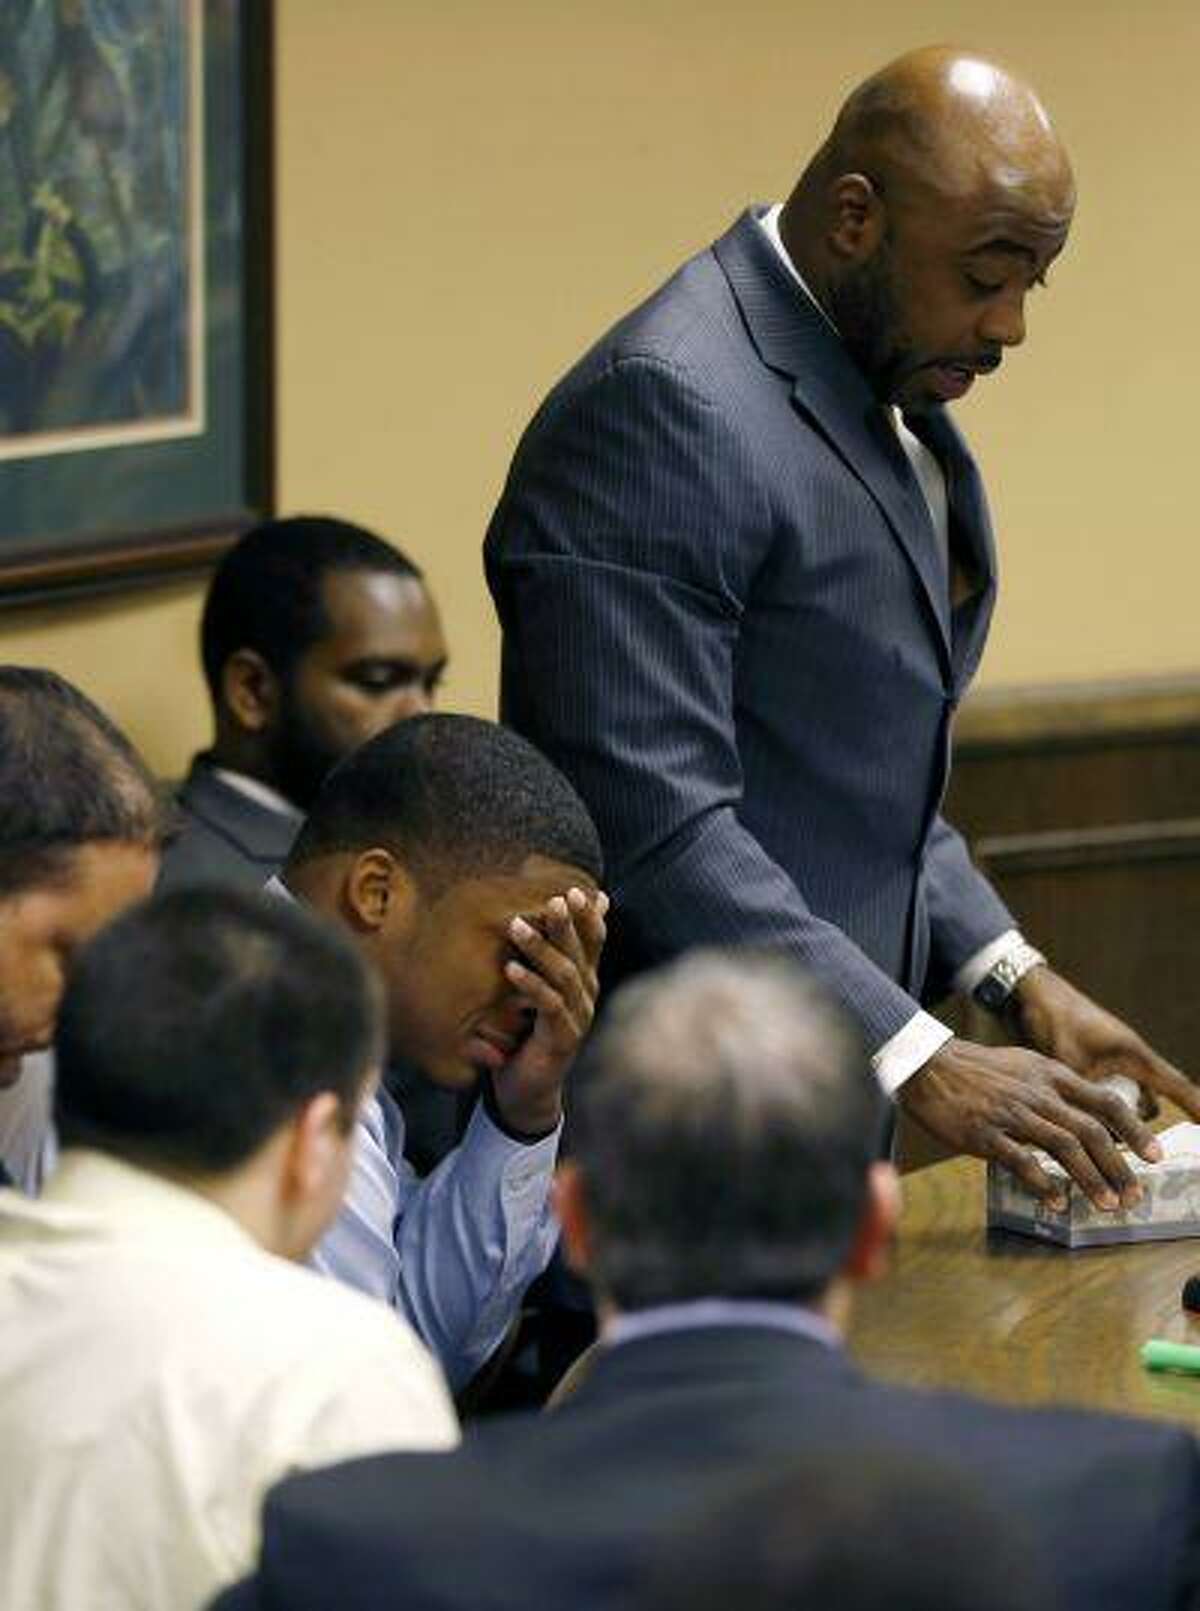 Ma'Lik Richmond covers his eyes and cries as his attorney Walter Madison, standing, asks the court for leniency after Richmond and co-defendant Trent Mays, lower left, were found delinquent on rape and other charges after their trial in juvenile court in Steubenville, Ohio, March 17. Mays and Richmond were accused of raping a 16-year-old West Virginia girl in August 2012.